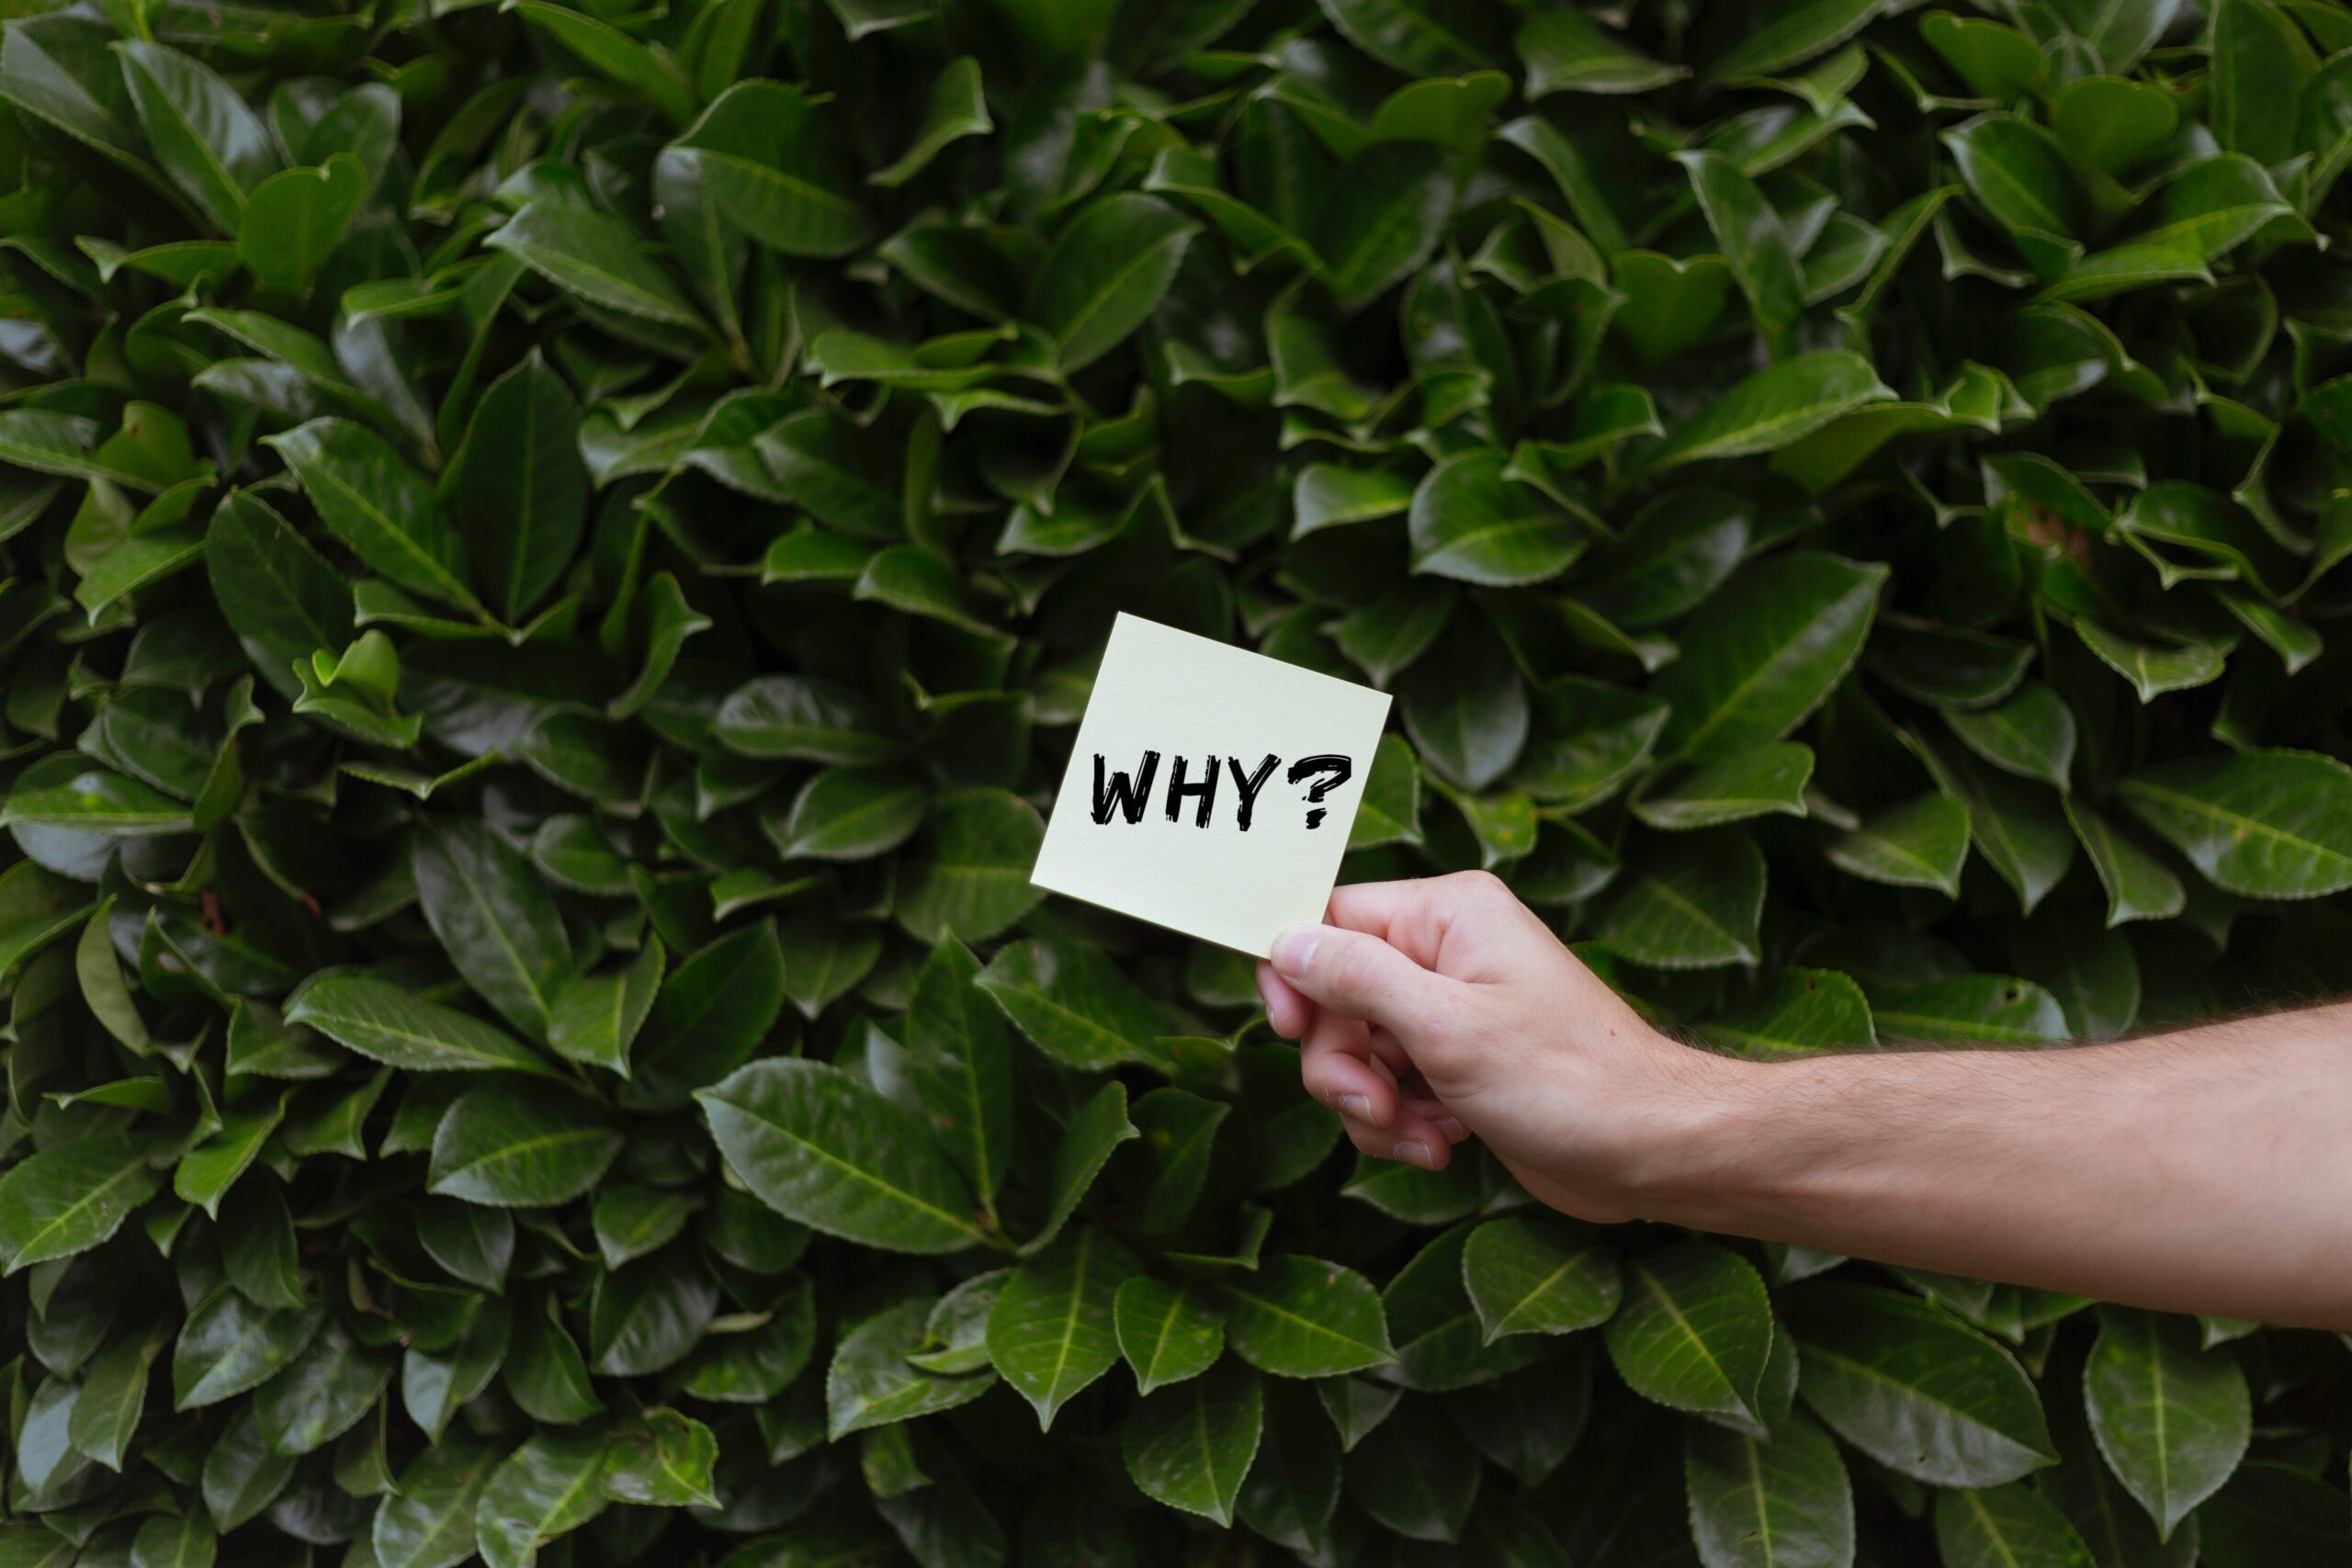 Photo by Image Hunter: https://www.pexels.com/photo/concept-image-with-a-question-on-a-sticky-note-against-green-hedge-13092792/ why-of-your-pourquoi-company-ceicia-cecile-lammer-talent-retention-company-harmony-success-passion